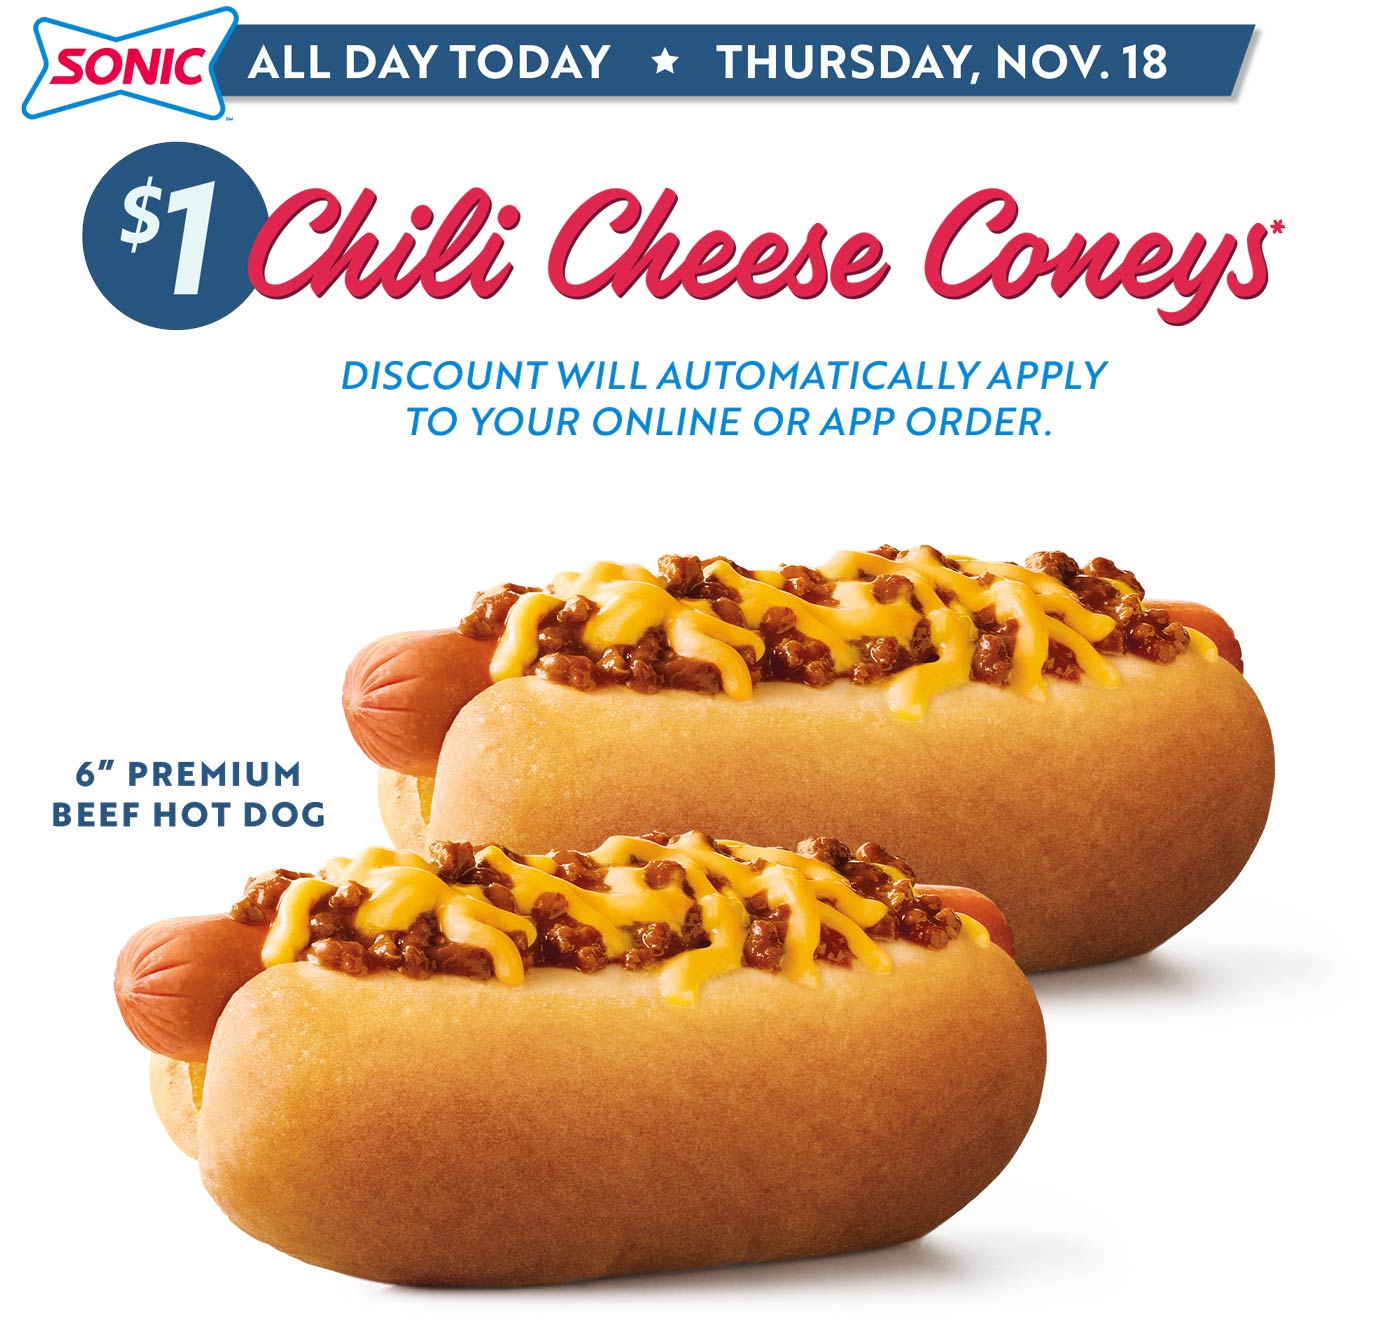 Sonic Drive-In restaurants Coupon  $1 chili cheese coney hot dogs today at Sonic Drive-In #sonicdrivein 